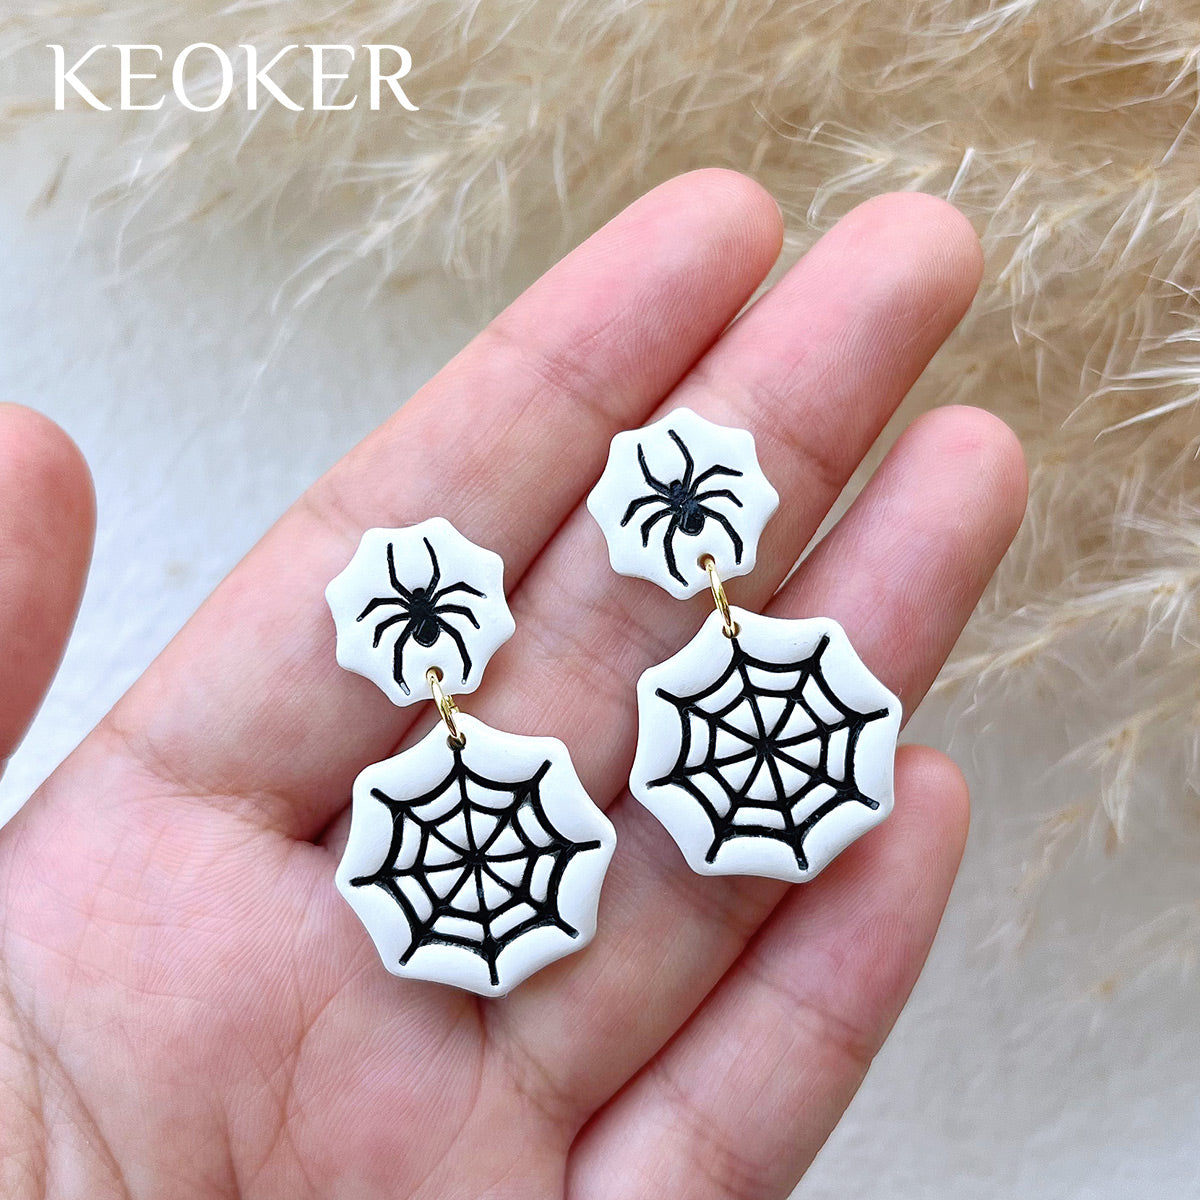 KEOKER Fall Polymer Clay Cutters(10 Shapes)